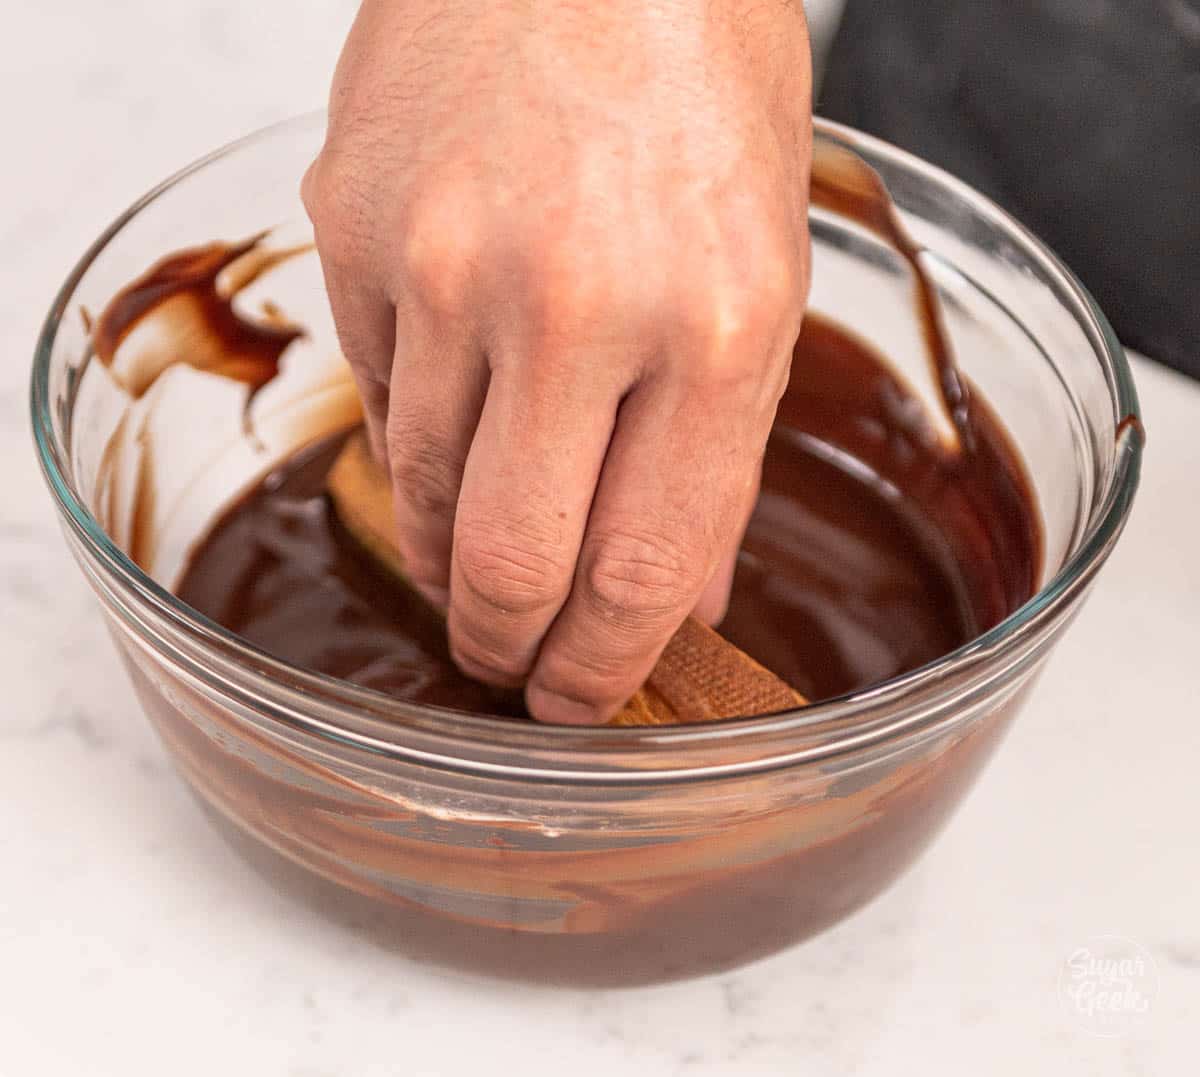 hand dipping eclair into chocolate ganache. 